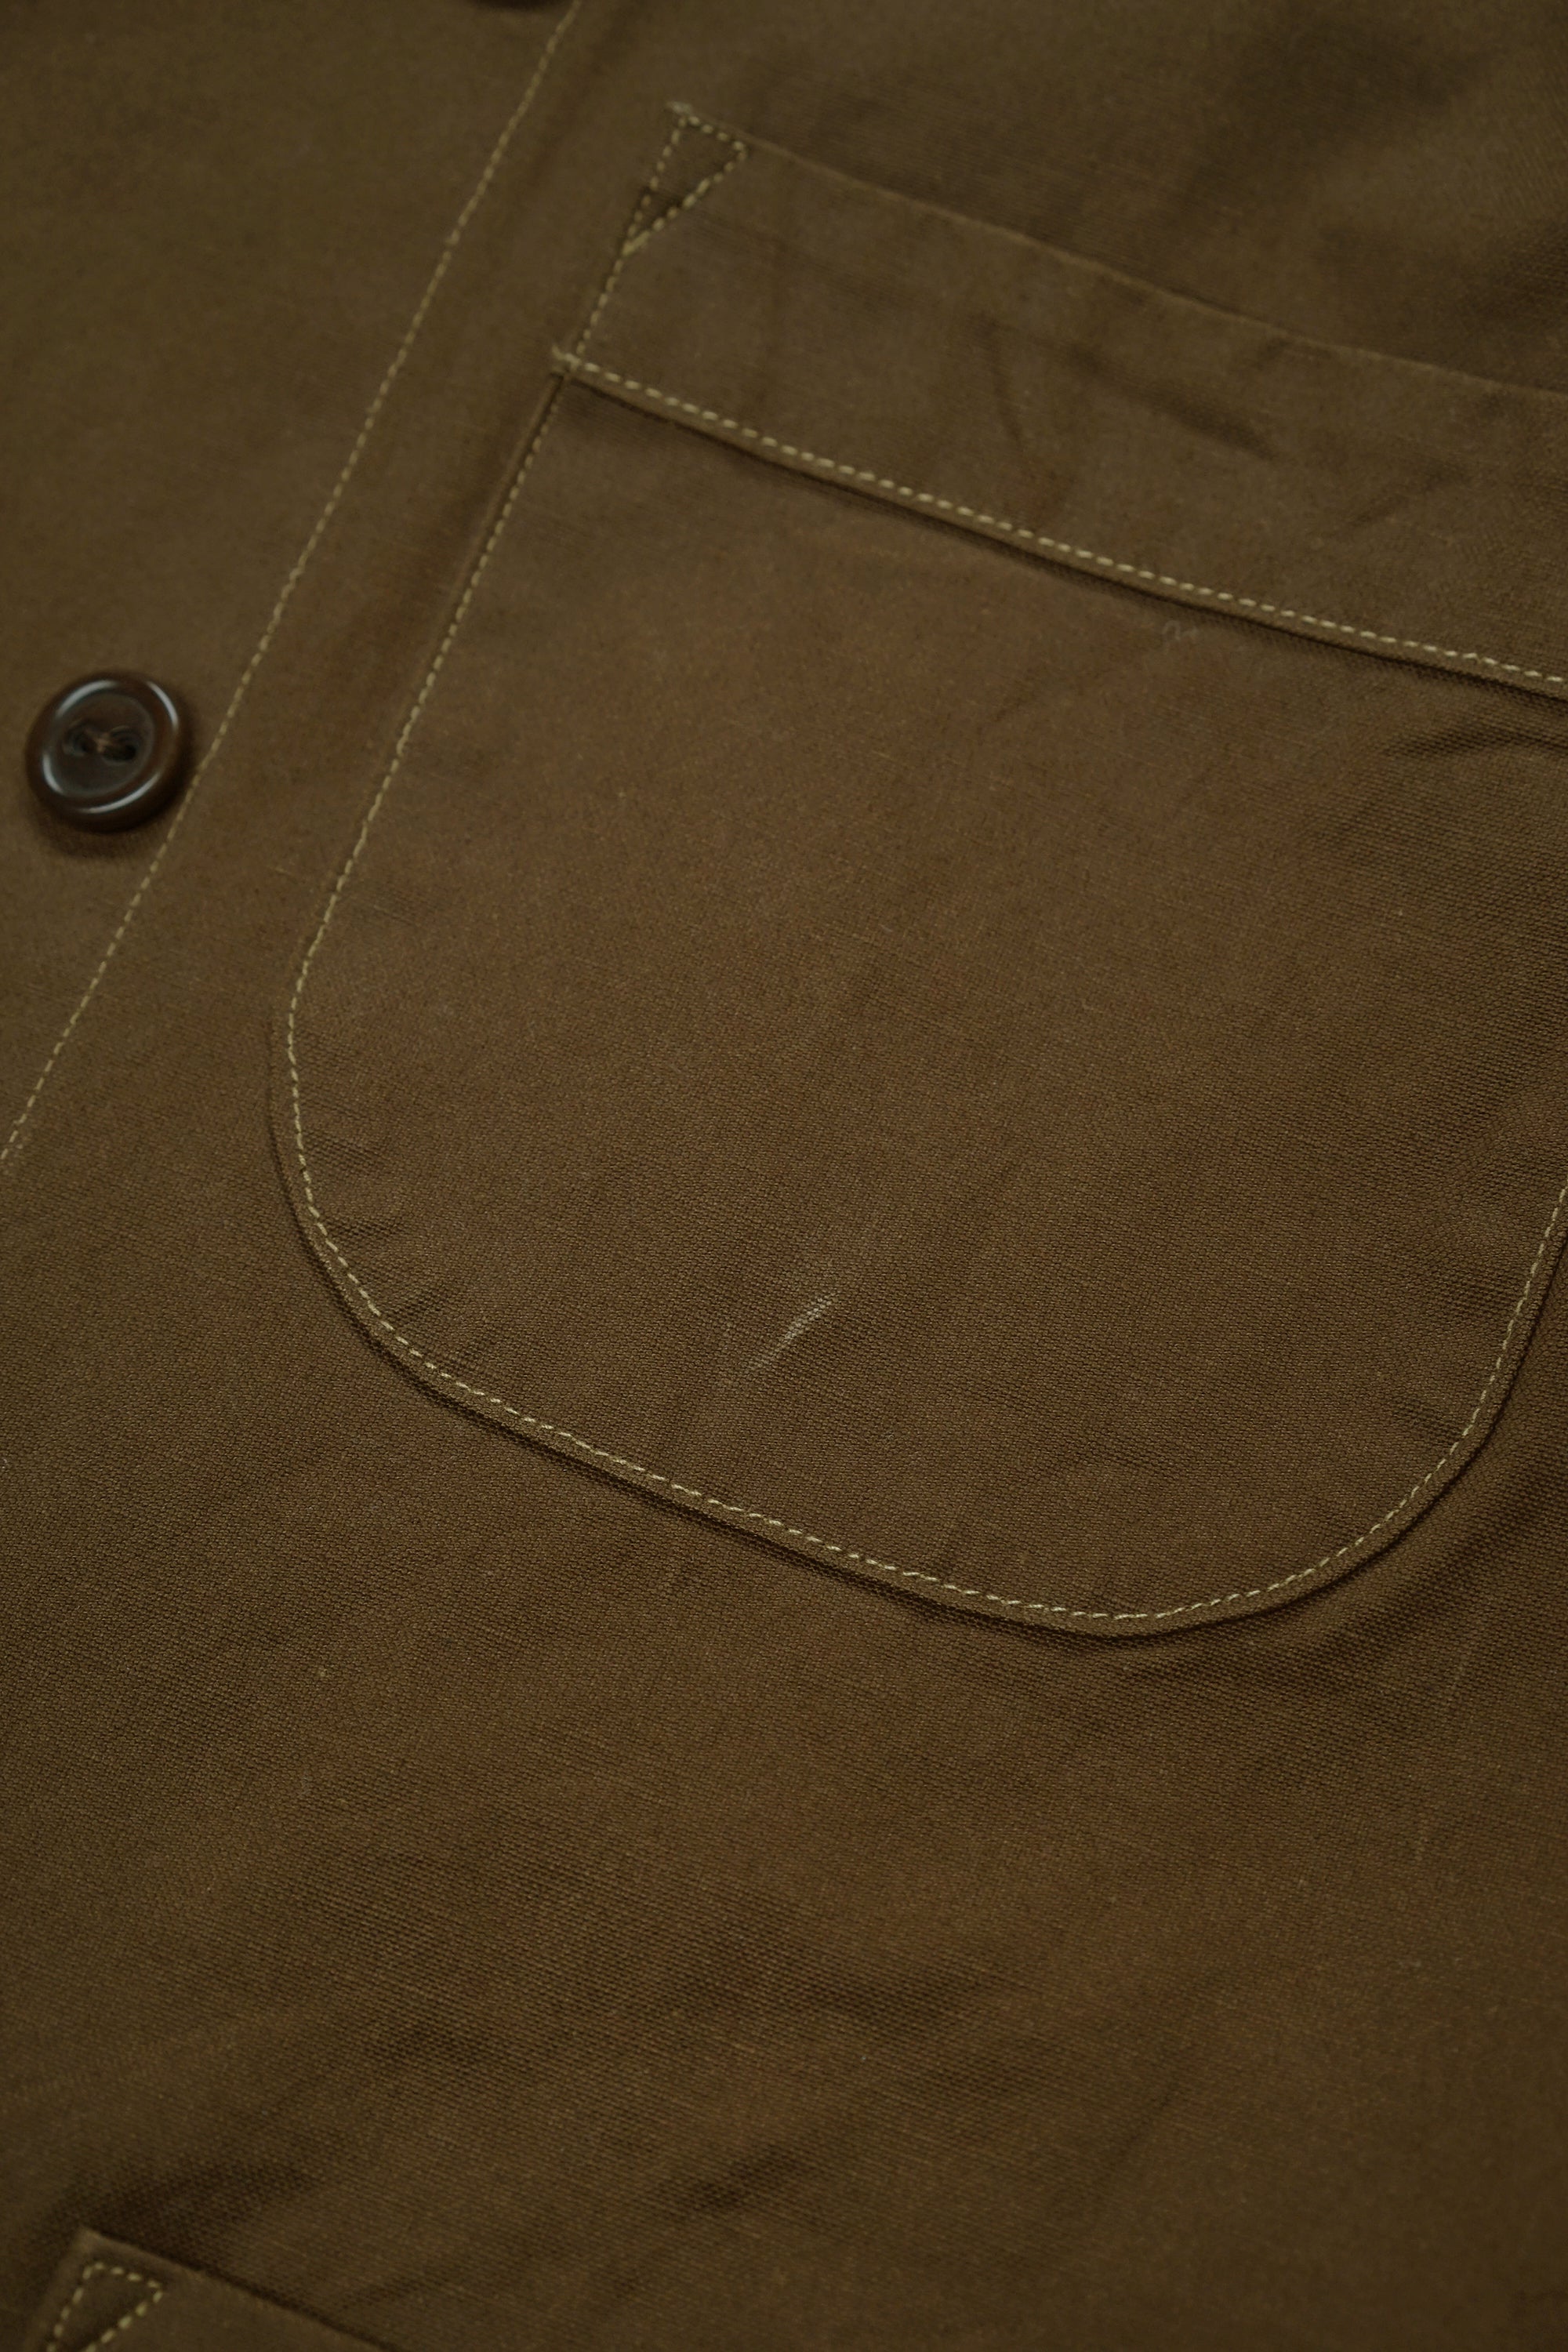 Cohérence Kees Ravello Selvedge Yacht Canvas Cotton Jacket *sample*